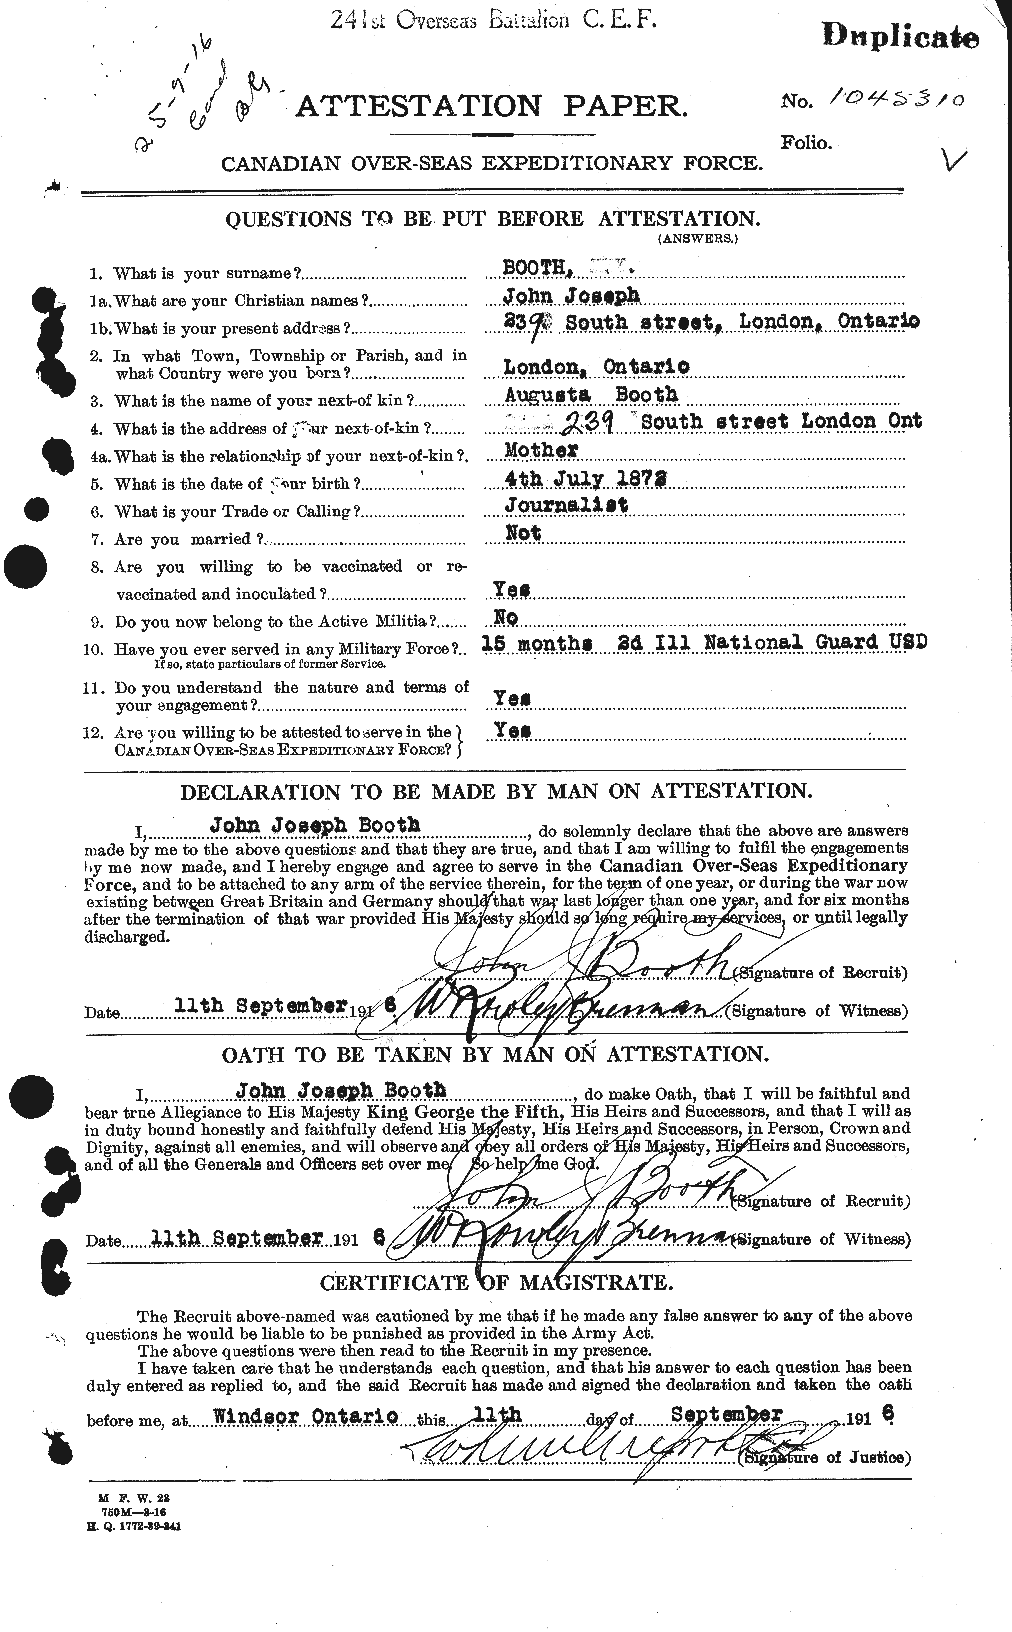 Personnel Records of the First World War - CEF 250932a